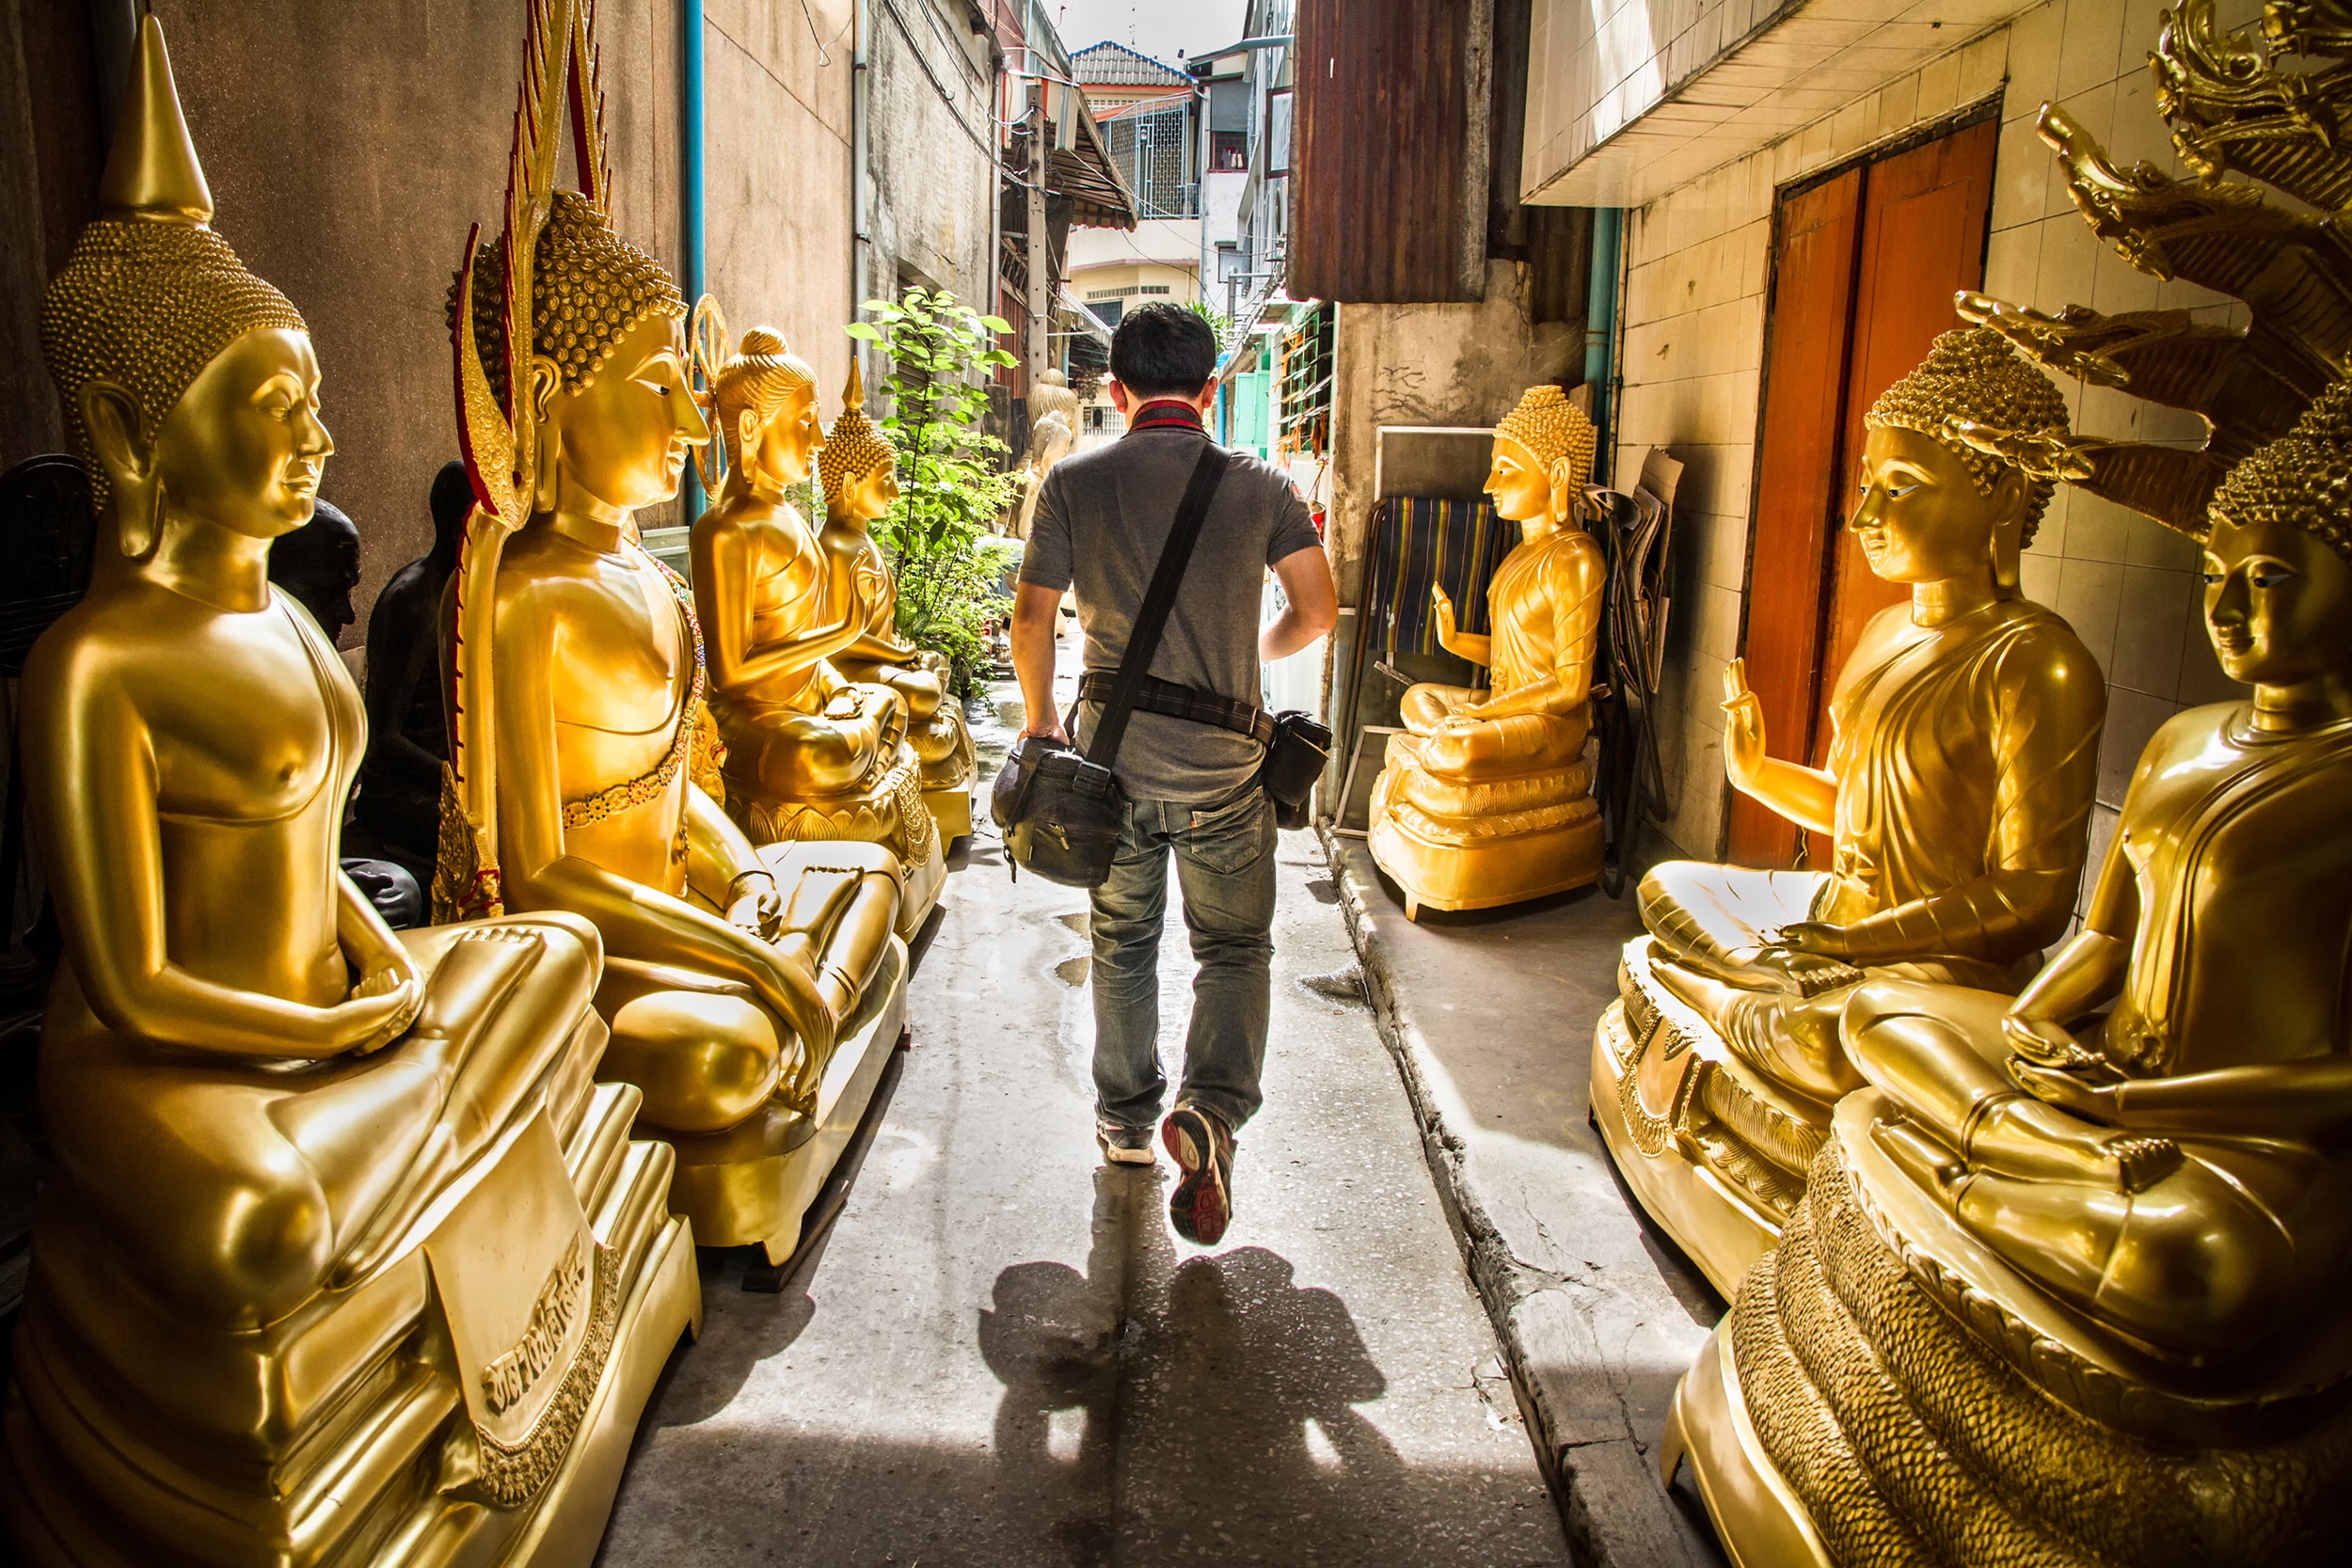 A man walking through the street lined with buddhas